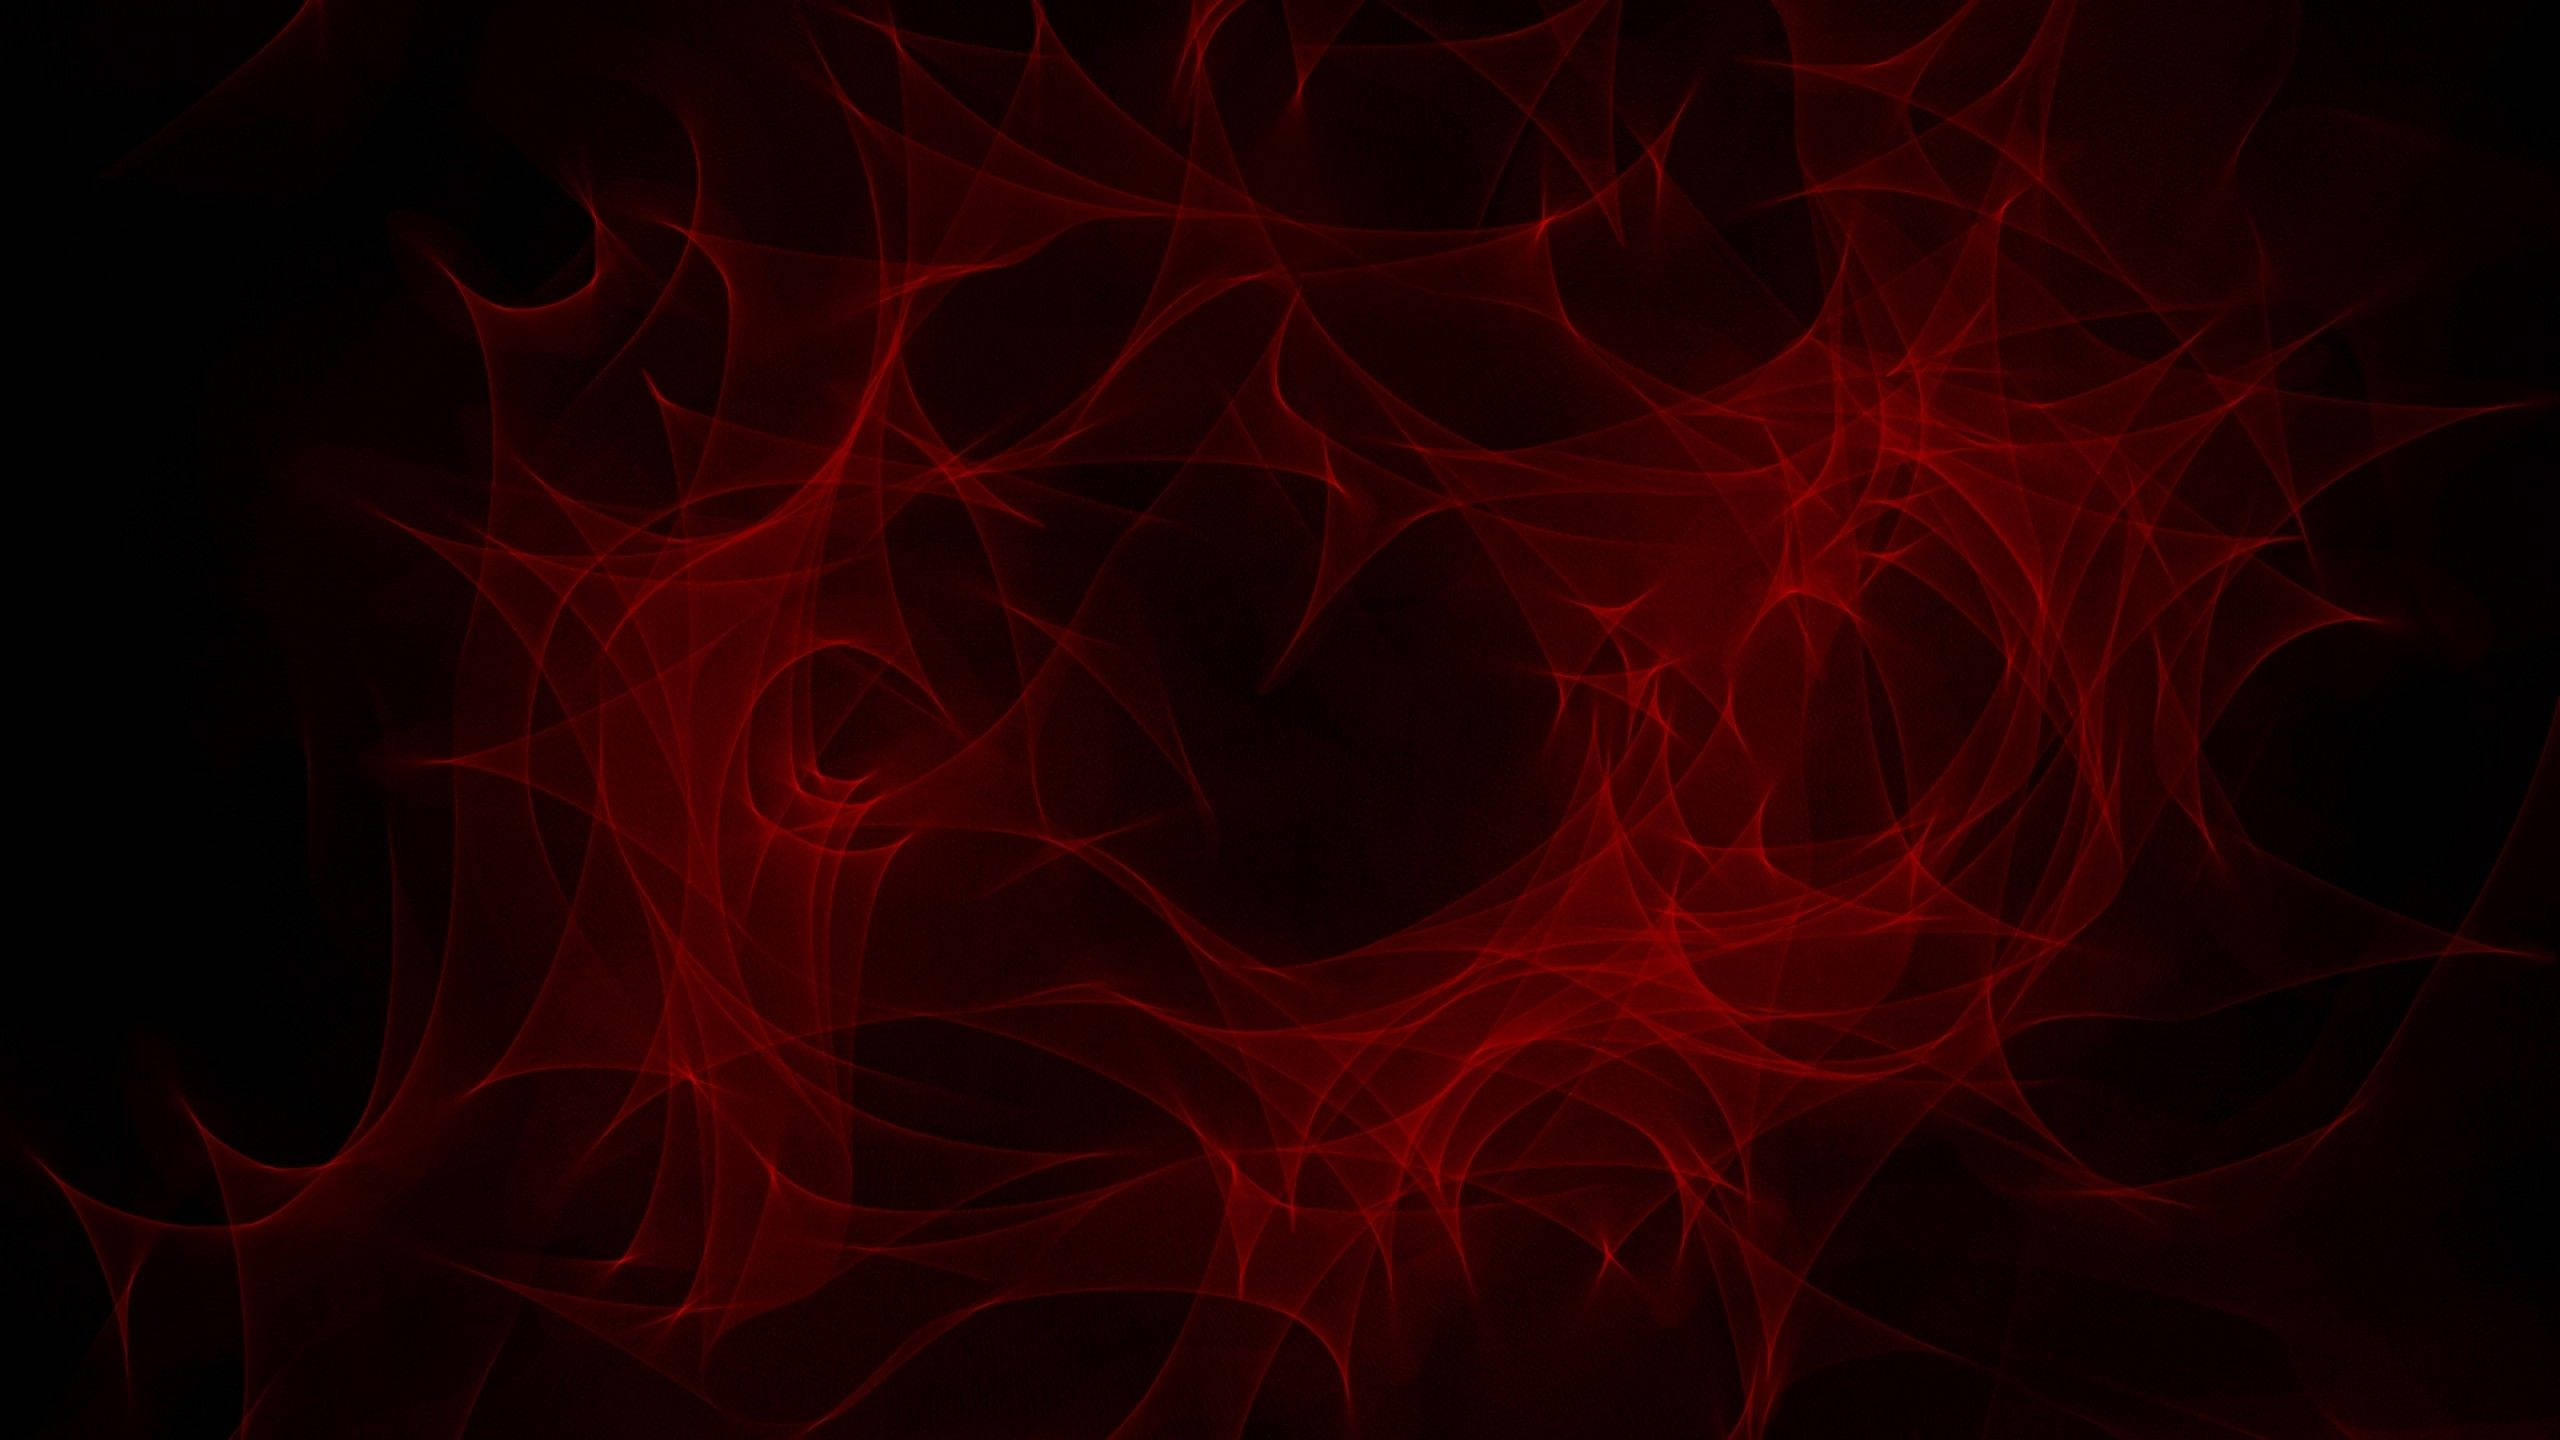 Vibrant Red And Black Youtube Cover Image Wallpaper